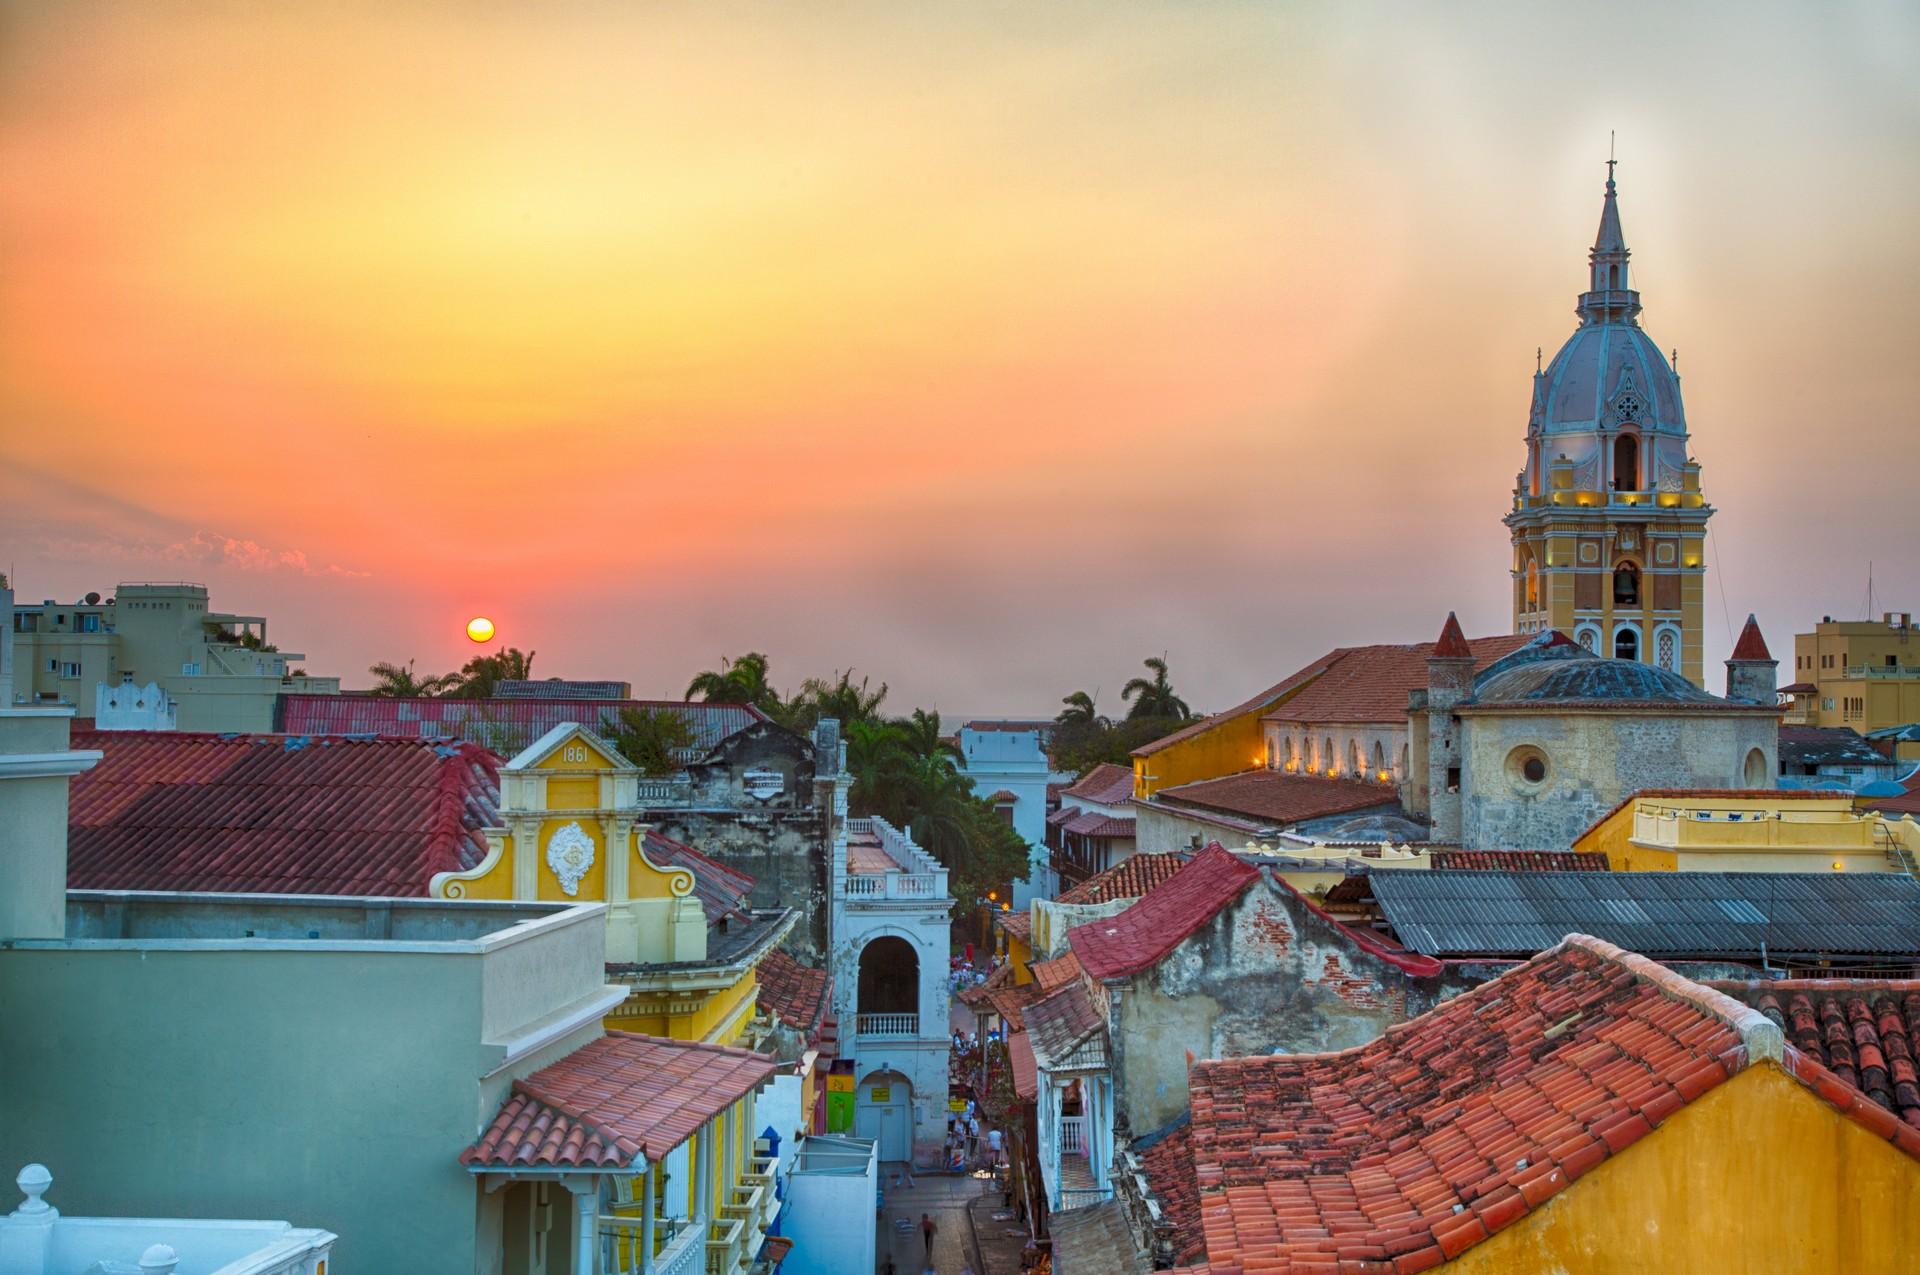 Architecture in Cartagena at sunset time